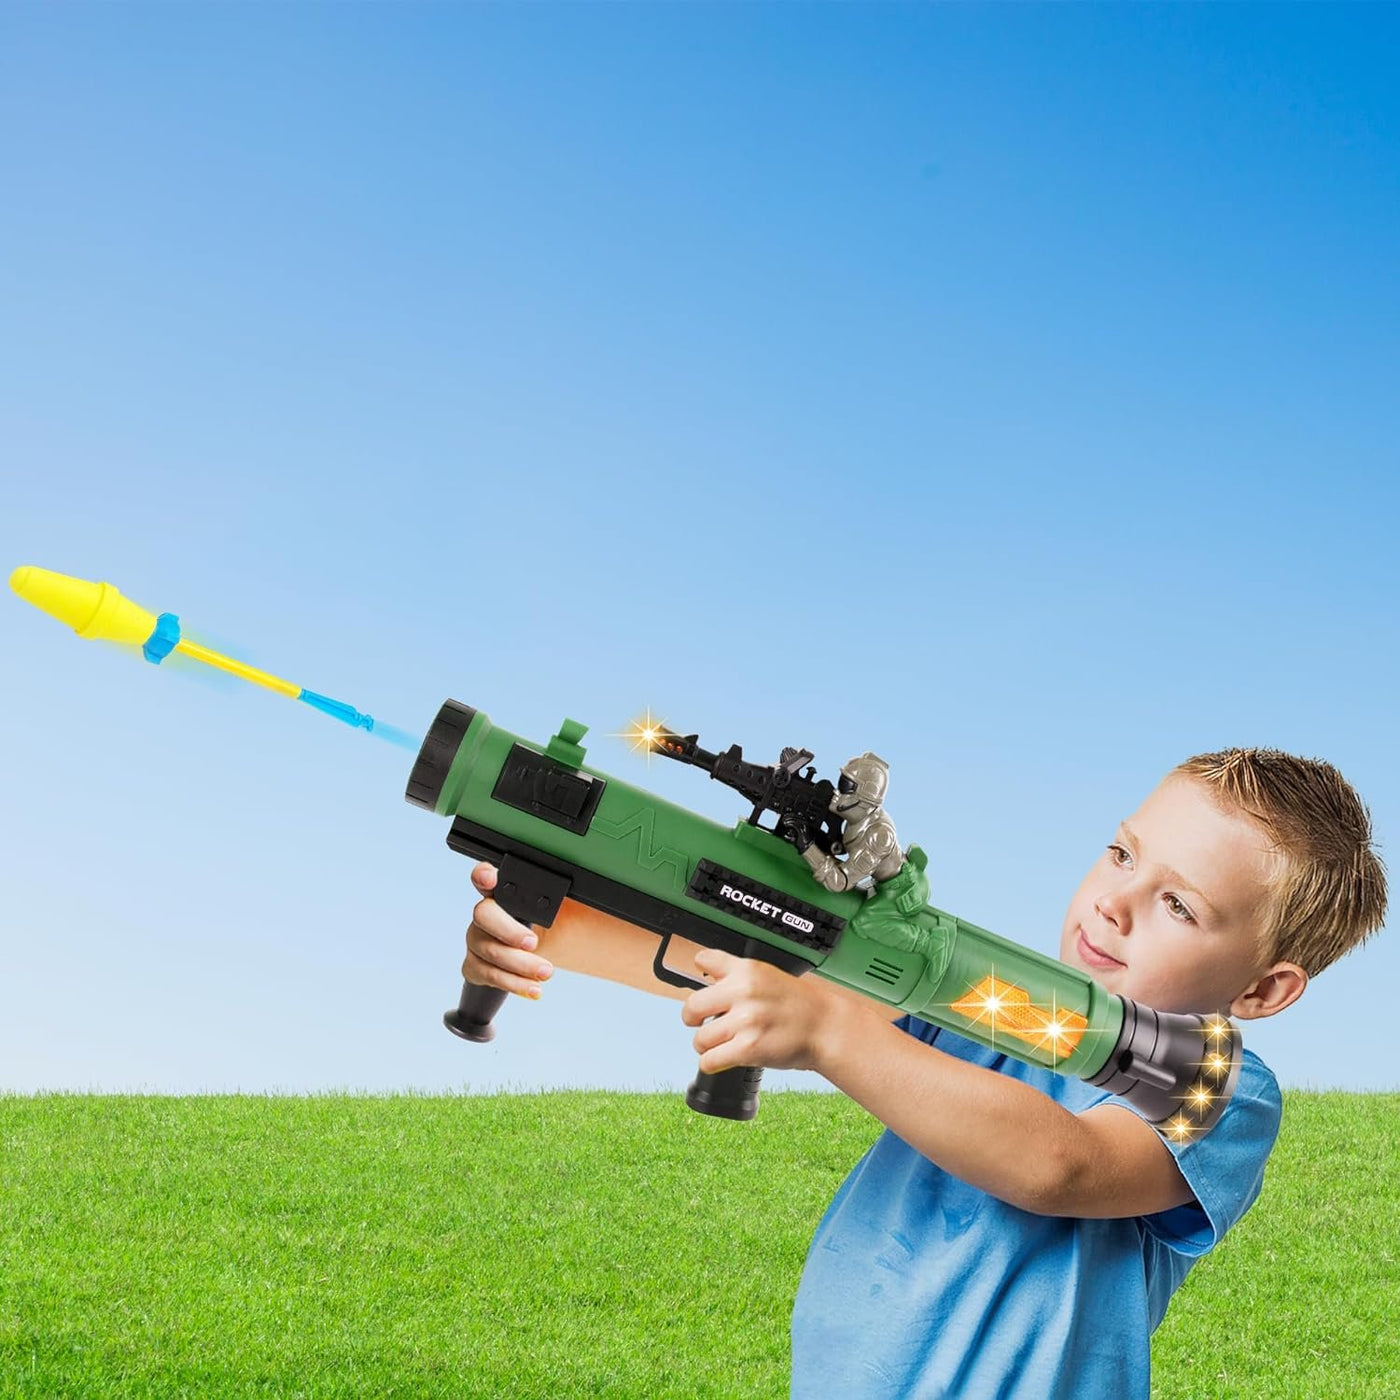 Rocket Launcher Handheld Gun with Lights & Sounds, Light Up Toy Rocket Launcher for Kids with 3 Rockets, Cool Sound, Vibration, & LED Effects, Military Pretend Play Toys for Boys